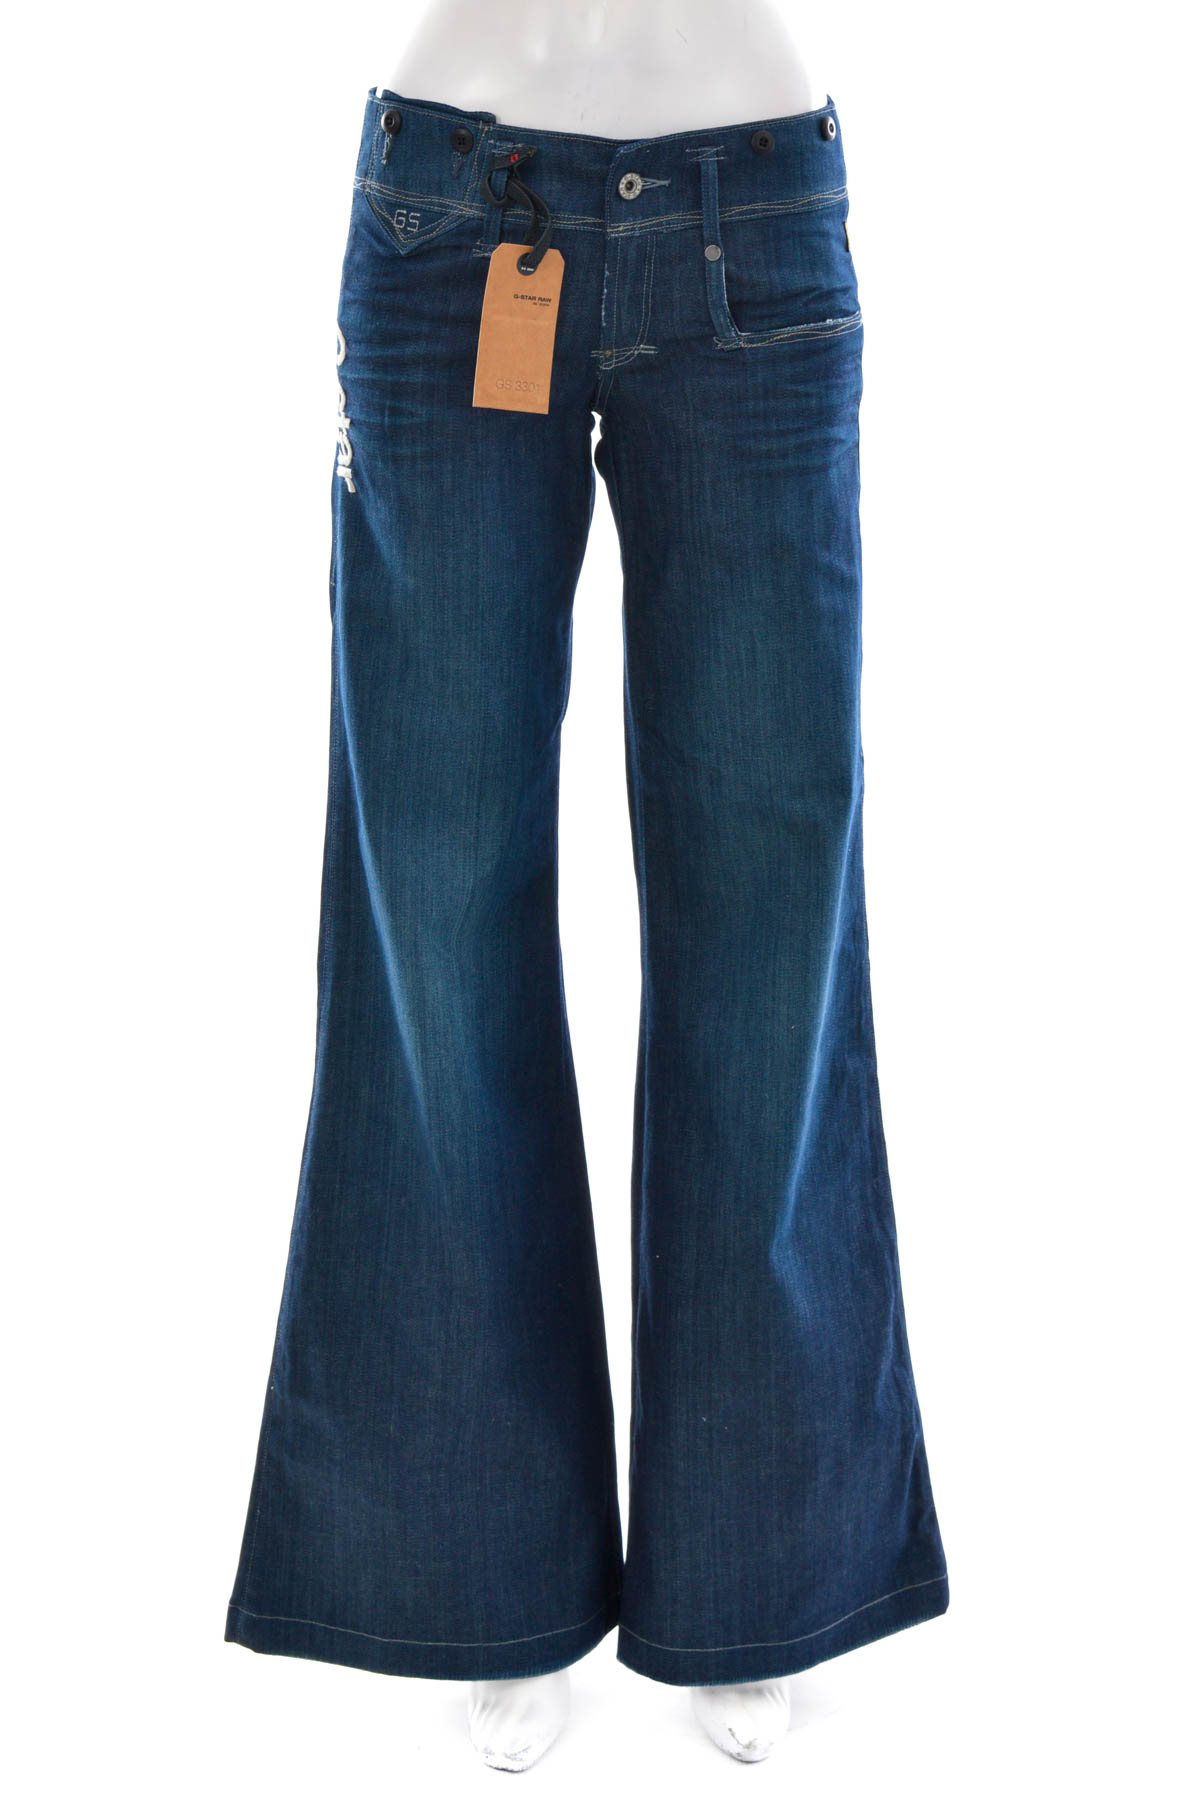 Women's jeans - 3301 by G-STAR RAW - 0